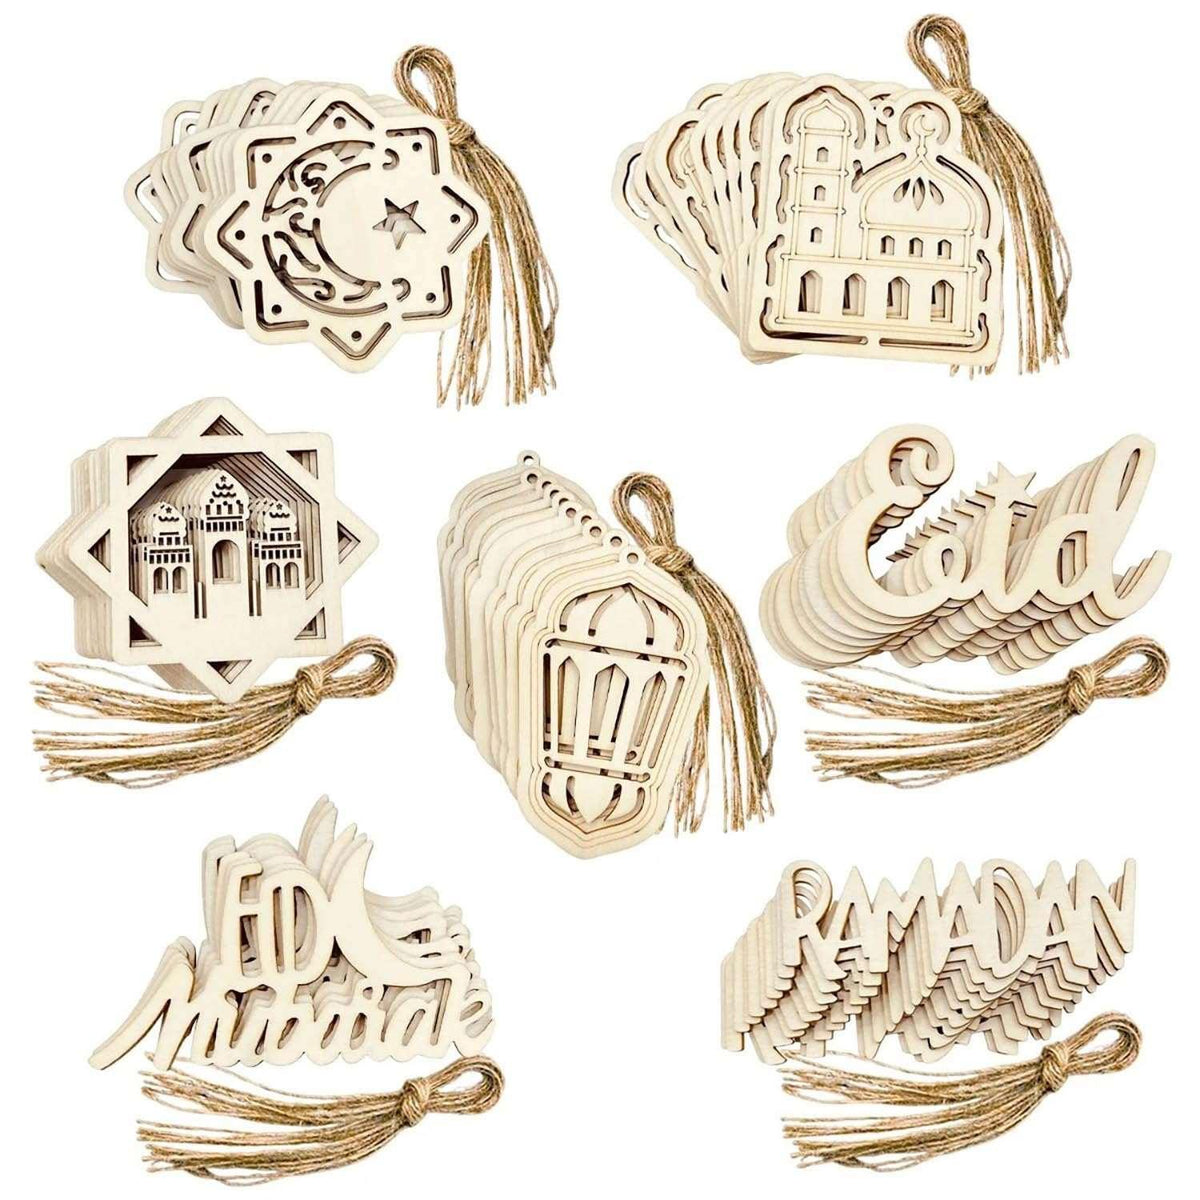 Haoser Set of 10 Eid Special Wooden Pendants, Islamic Festival Decorations, Crescent Moon and Star Design, Handcrafted Eid Mubarak Gifts, Wooden Eid Ornaments, Ramadan and Eid Home Decor (DGN-1) - Haoser